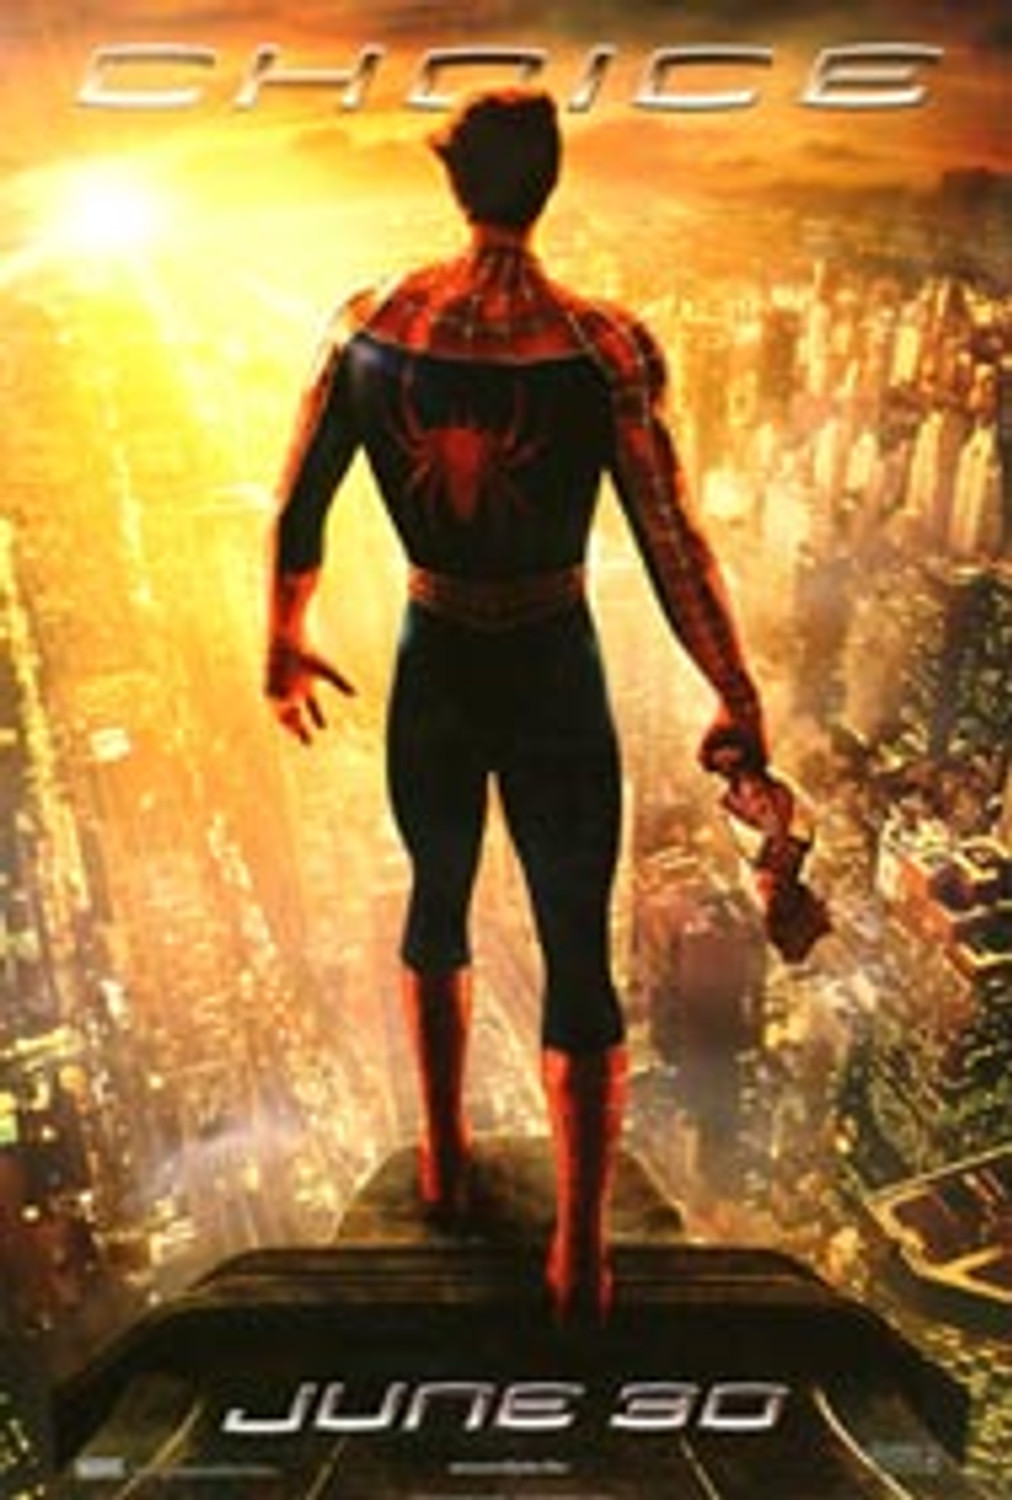 SPIDERMAN (Choice Reprint) (Double Sided - High Gloss) POSTER